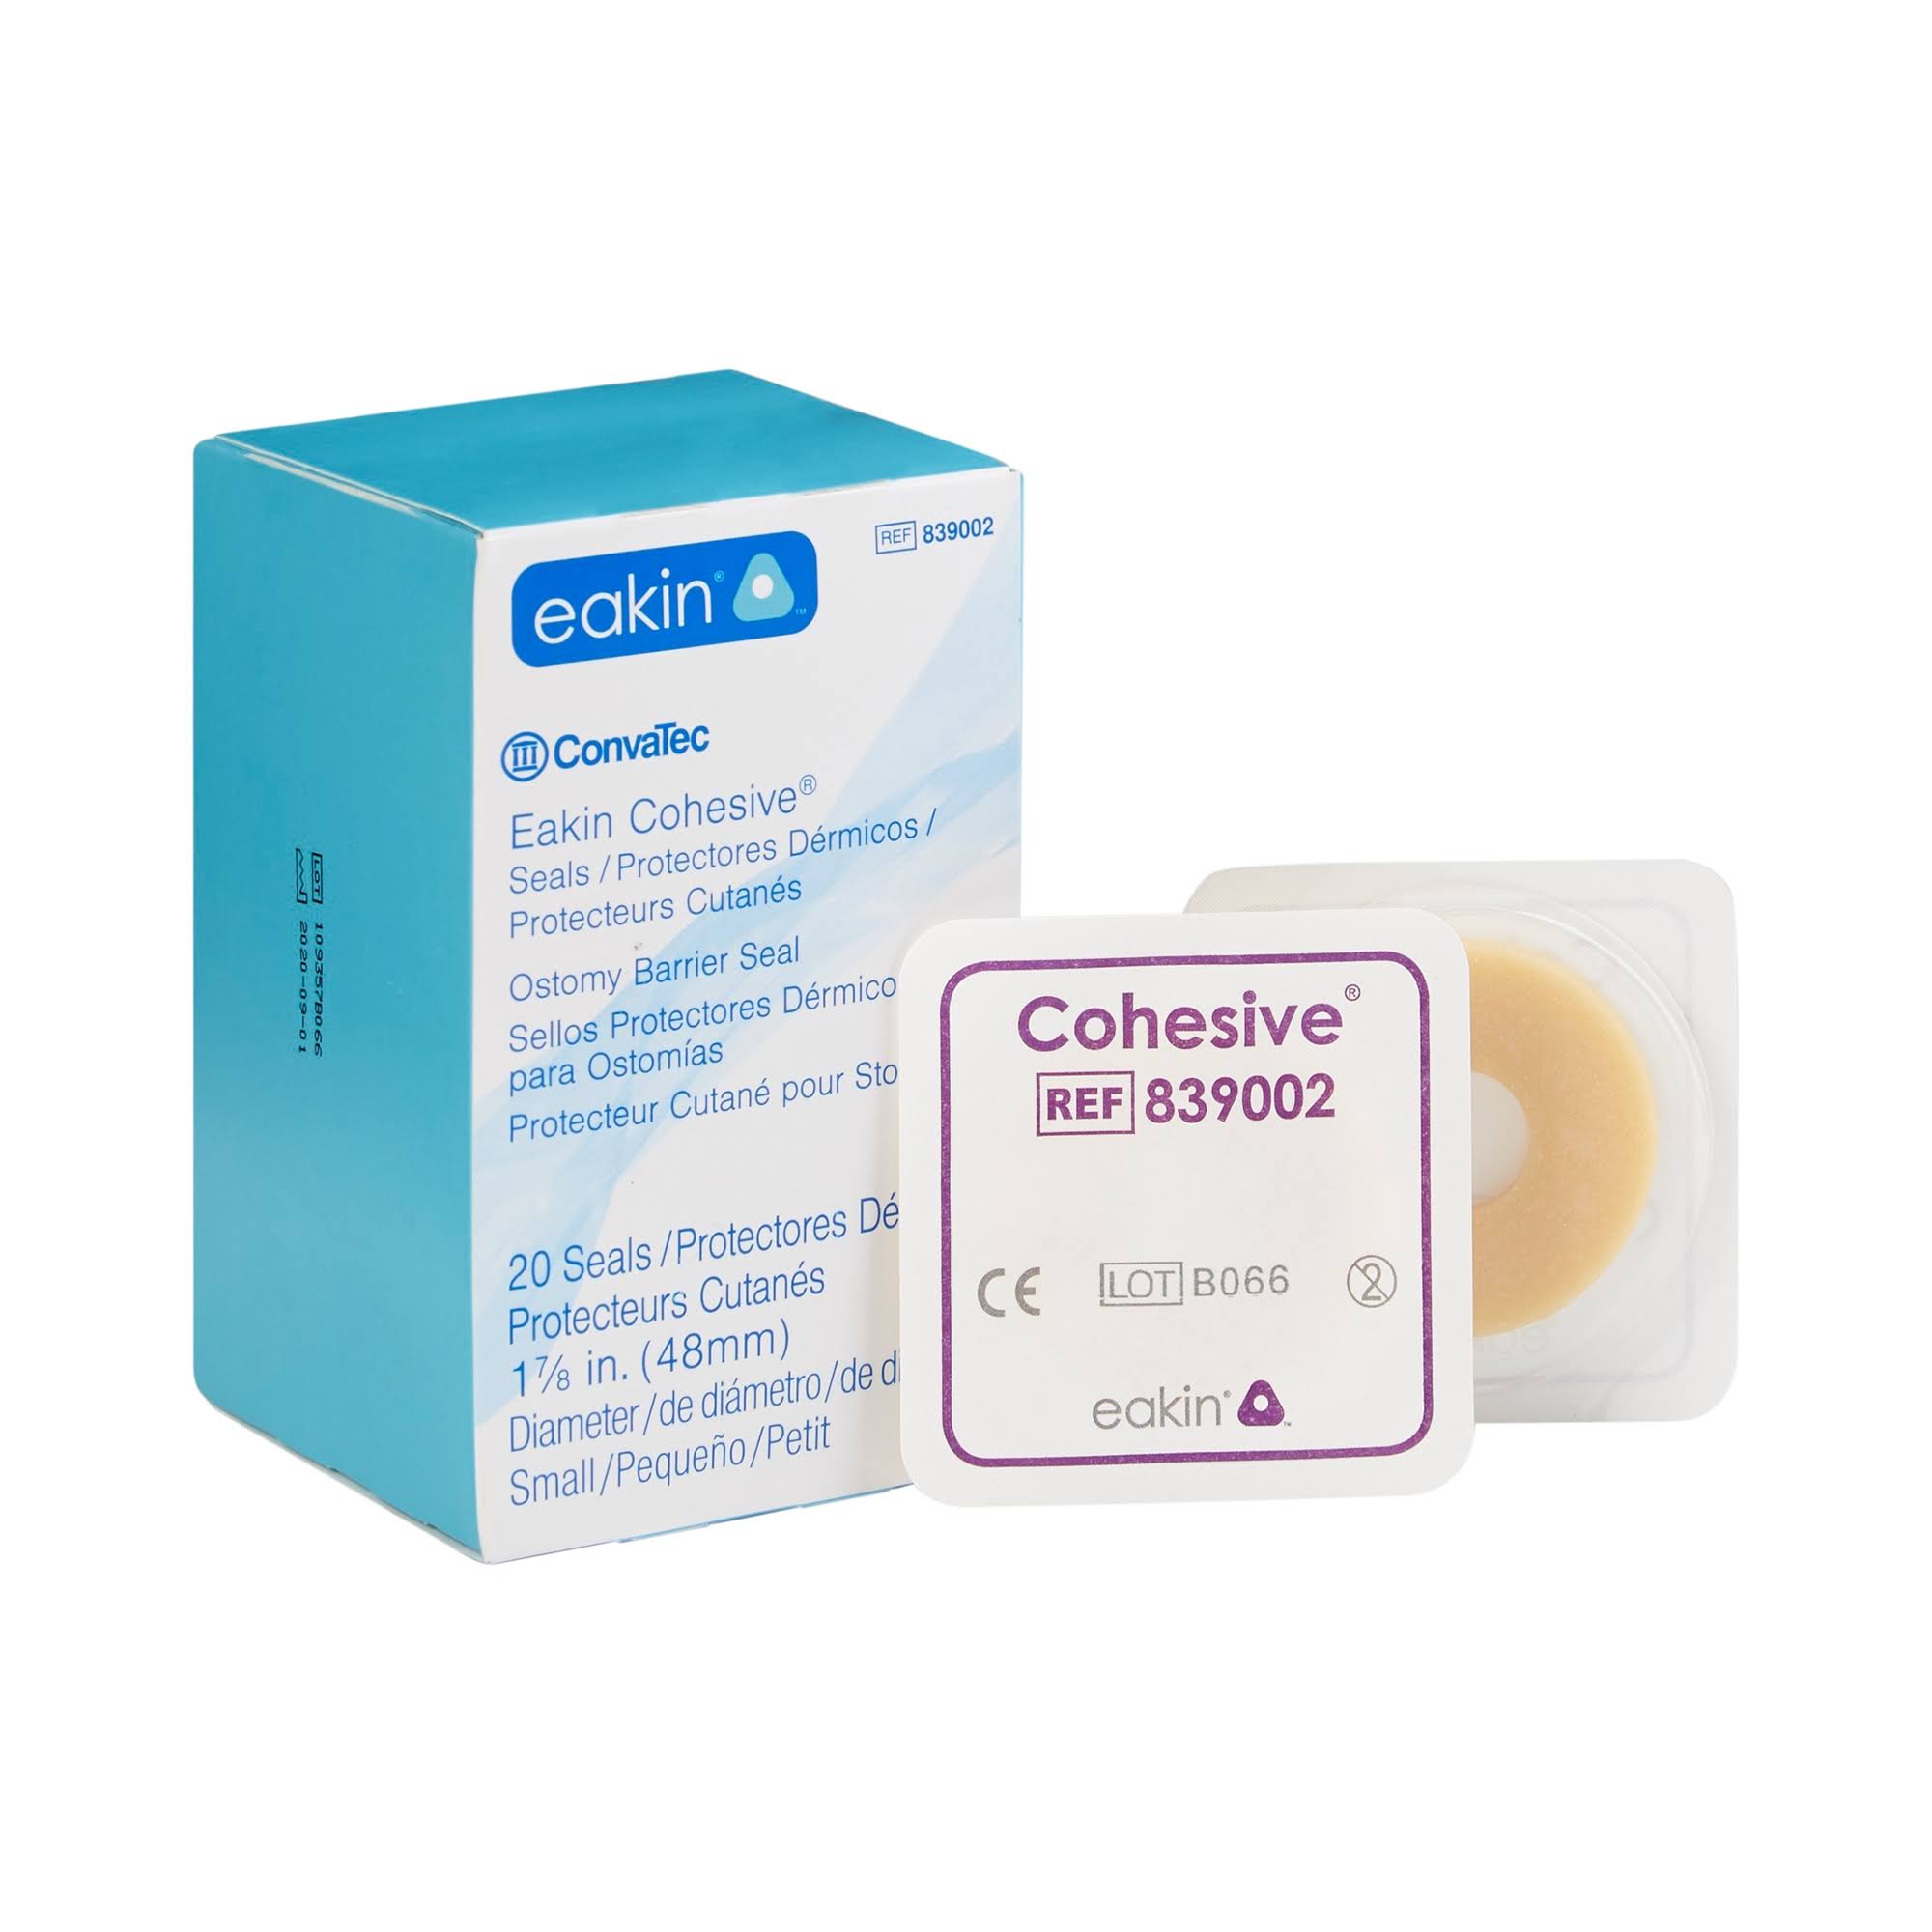 ConvaTec Eakin Cohesive Small Ostomy Barrier Seals - x20